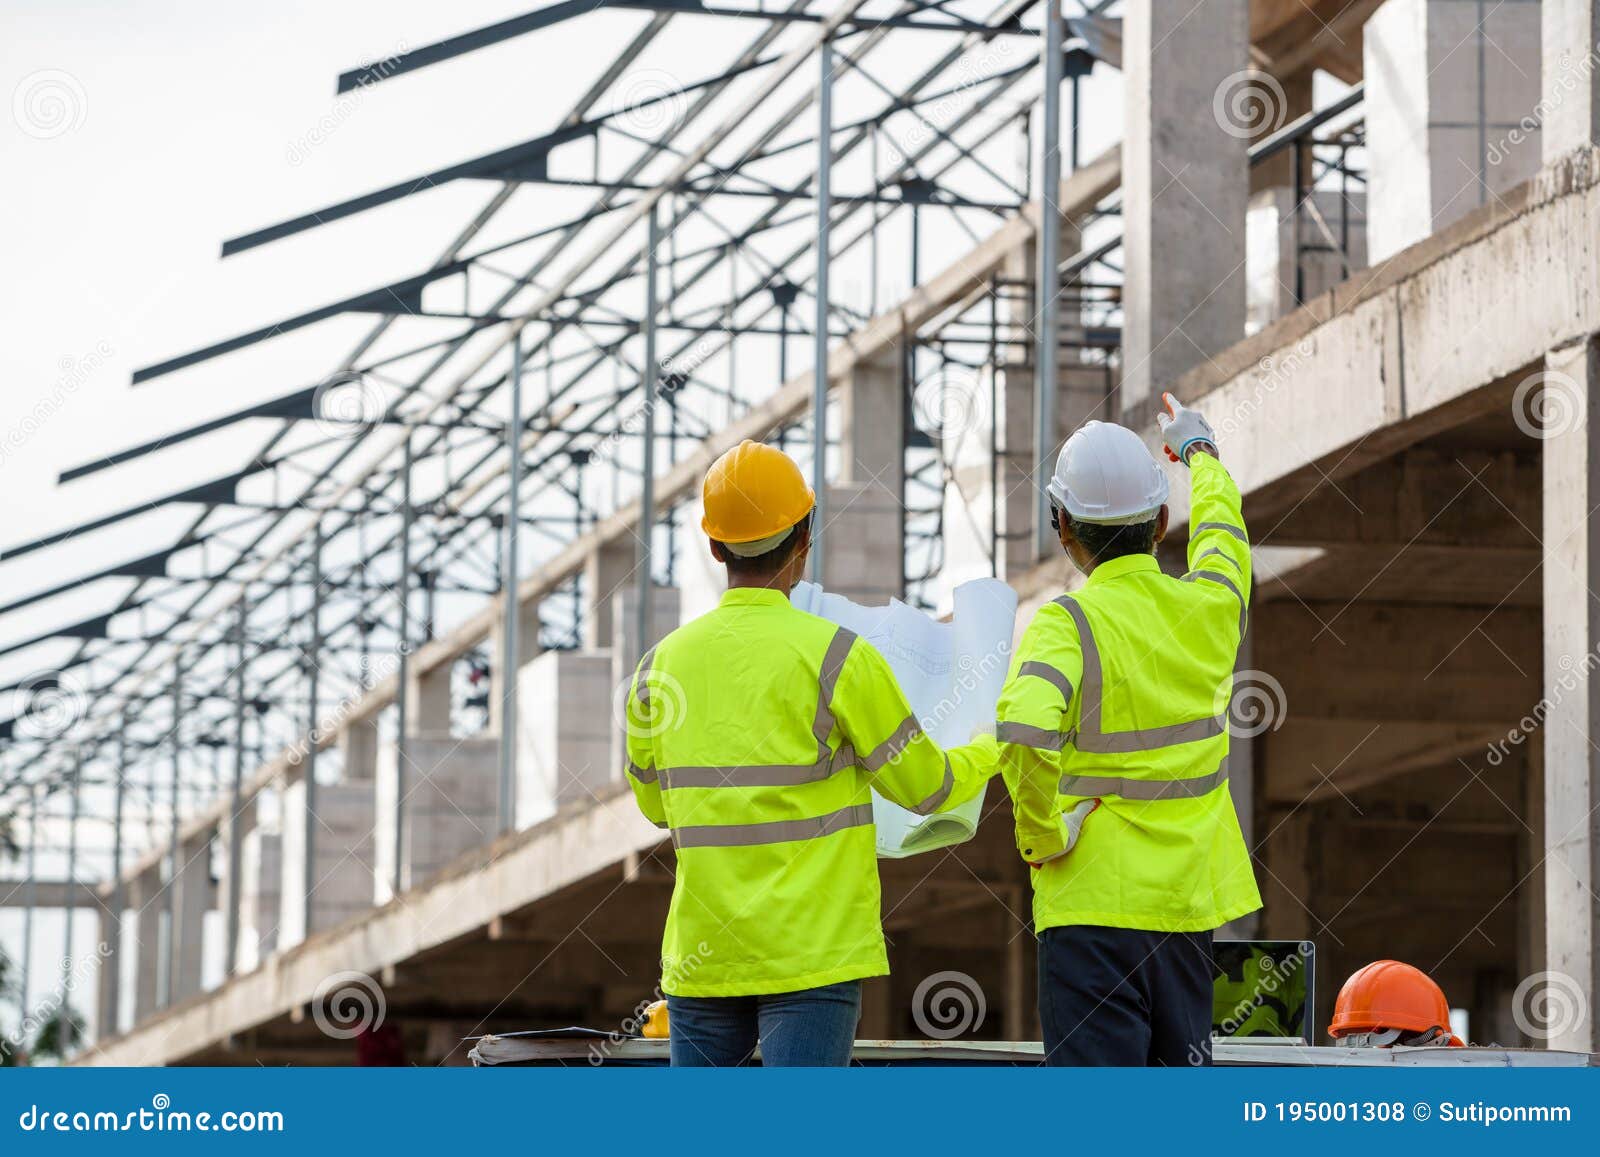 engineerings in the constructions site